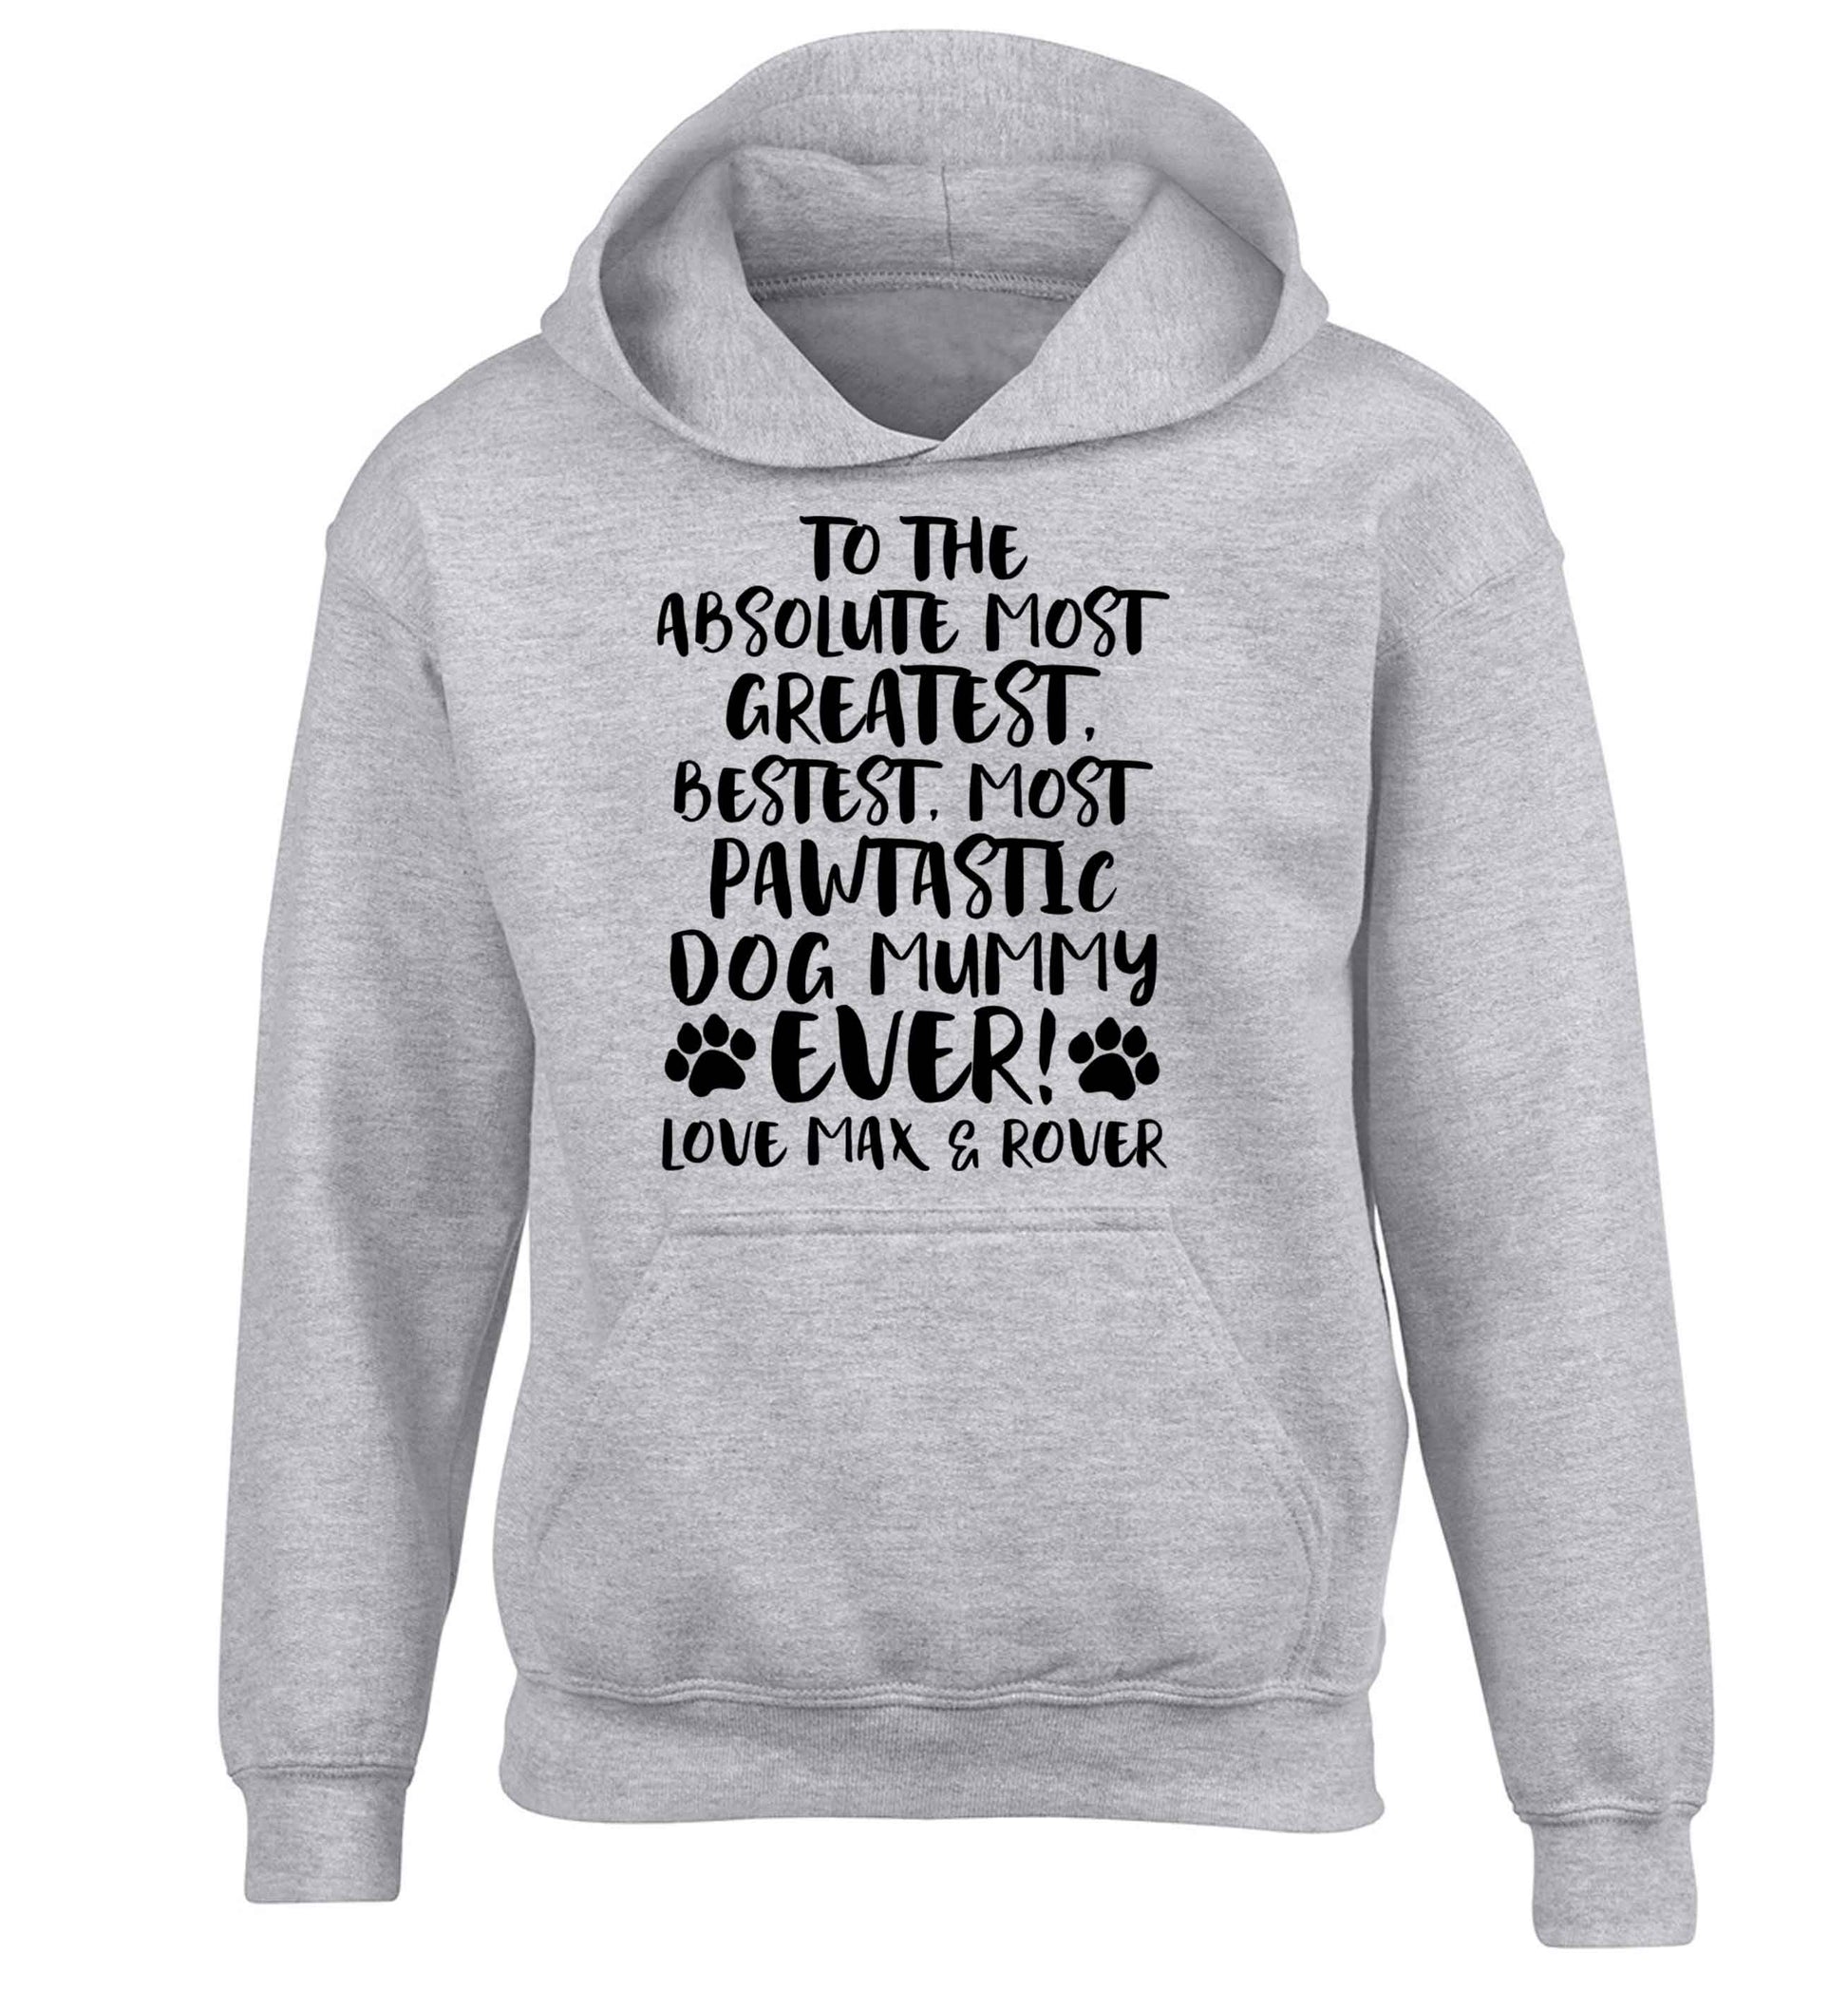 Personalsied to the most pawtastic dog mummy ever children's grey hoodie 12-13 Years